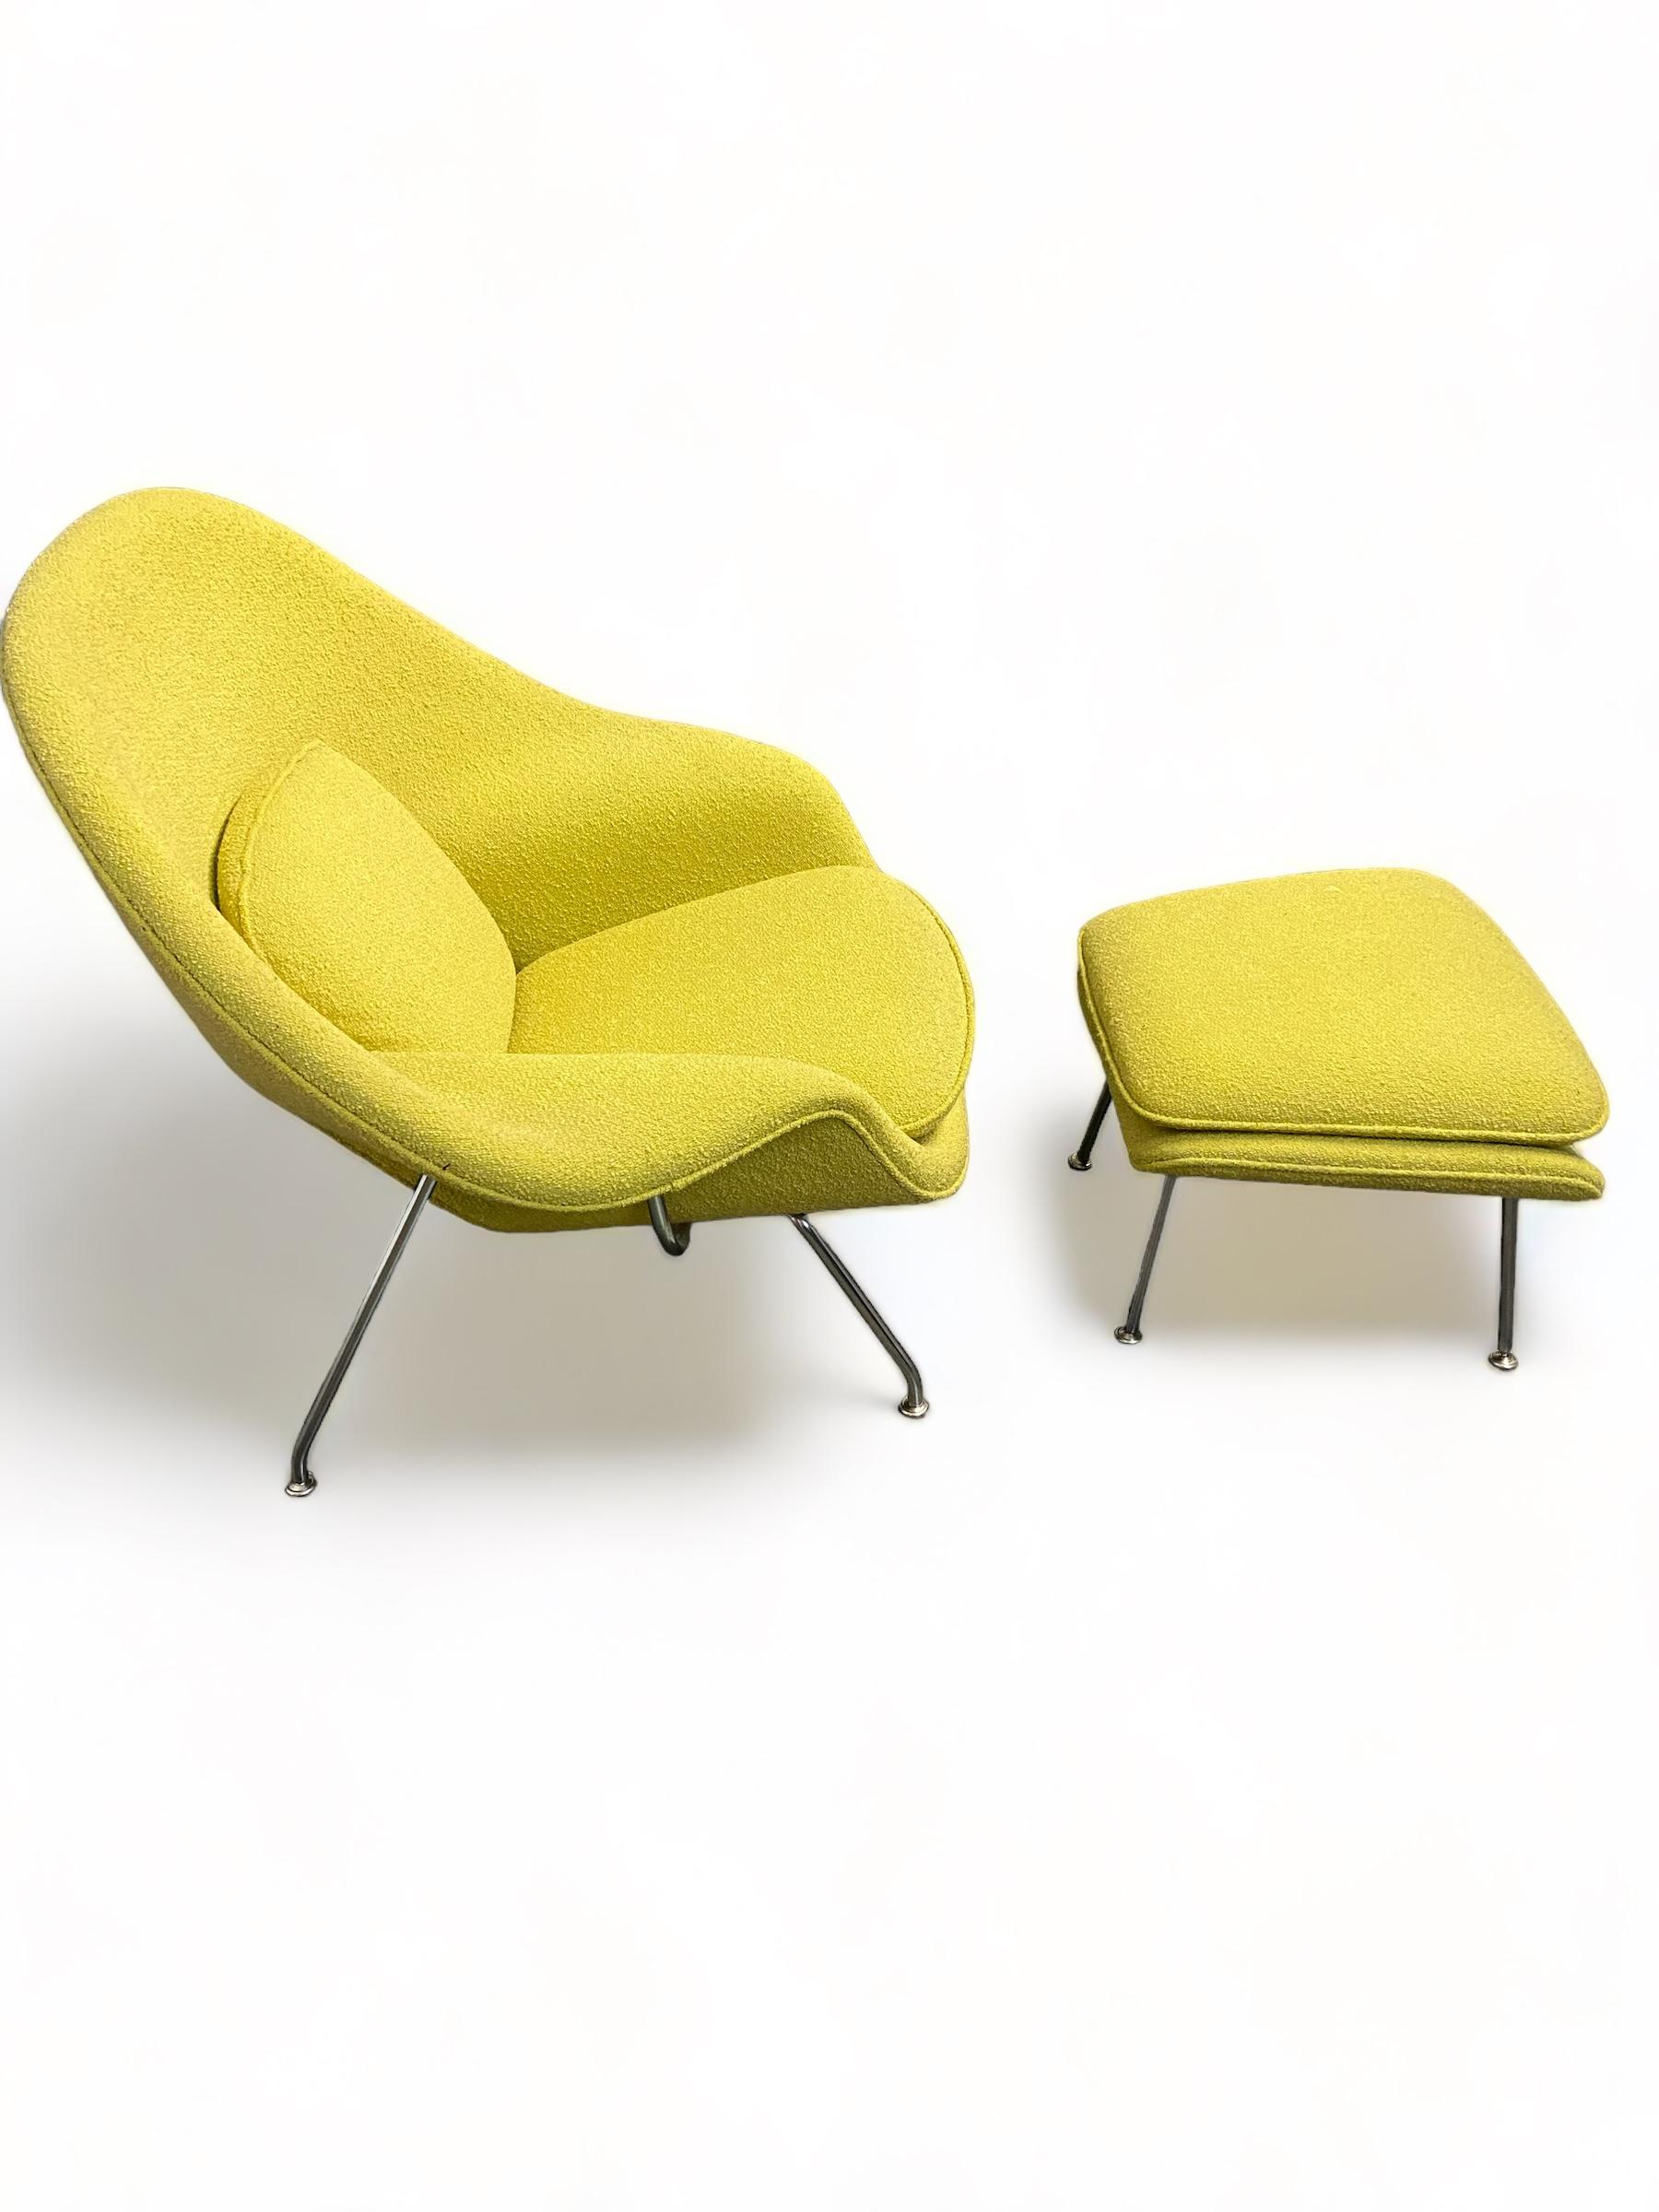 A beautiful buttery yellow Bouclé Womb Chair by Eero Saarinen for Knoll. This one has the wonderful textured Bouclè fabric, in a stand out buttery yellow. 

Condition is excellent, the fabric has nearly no wear, and the chrome frame is beautiful and